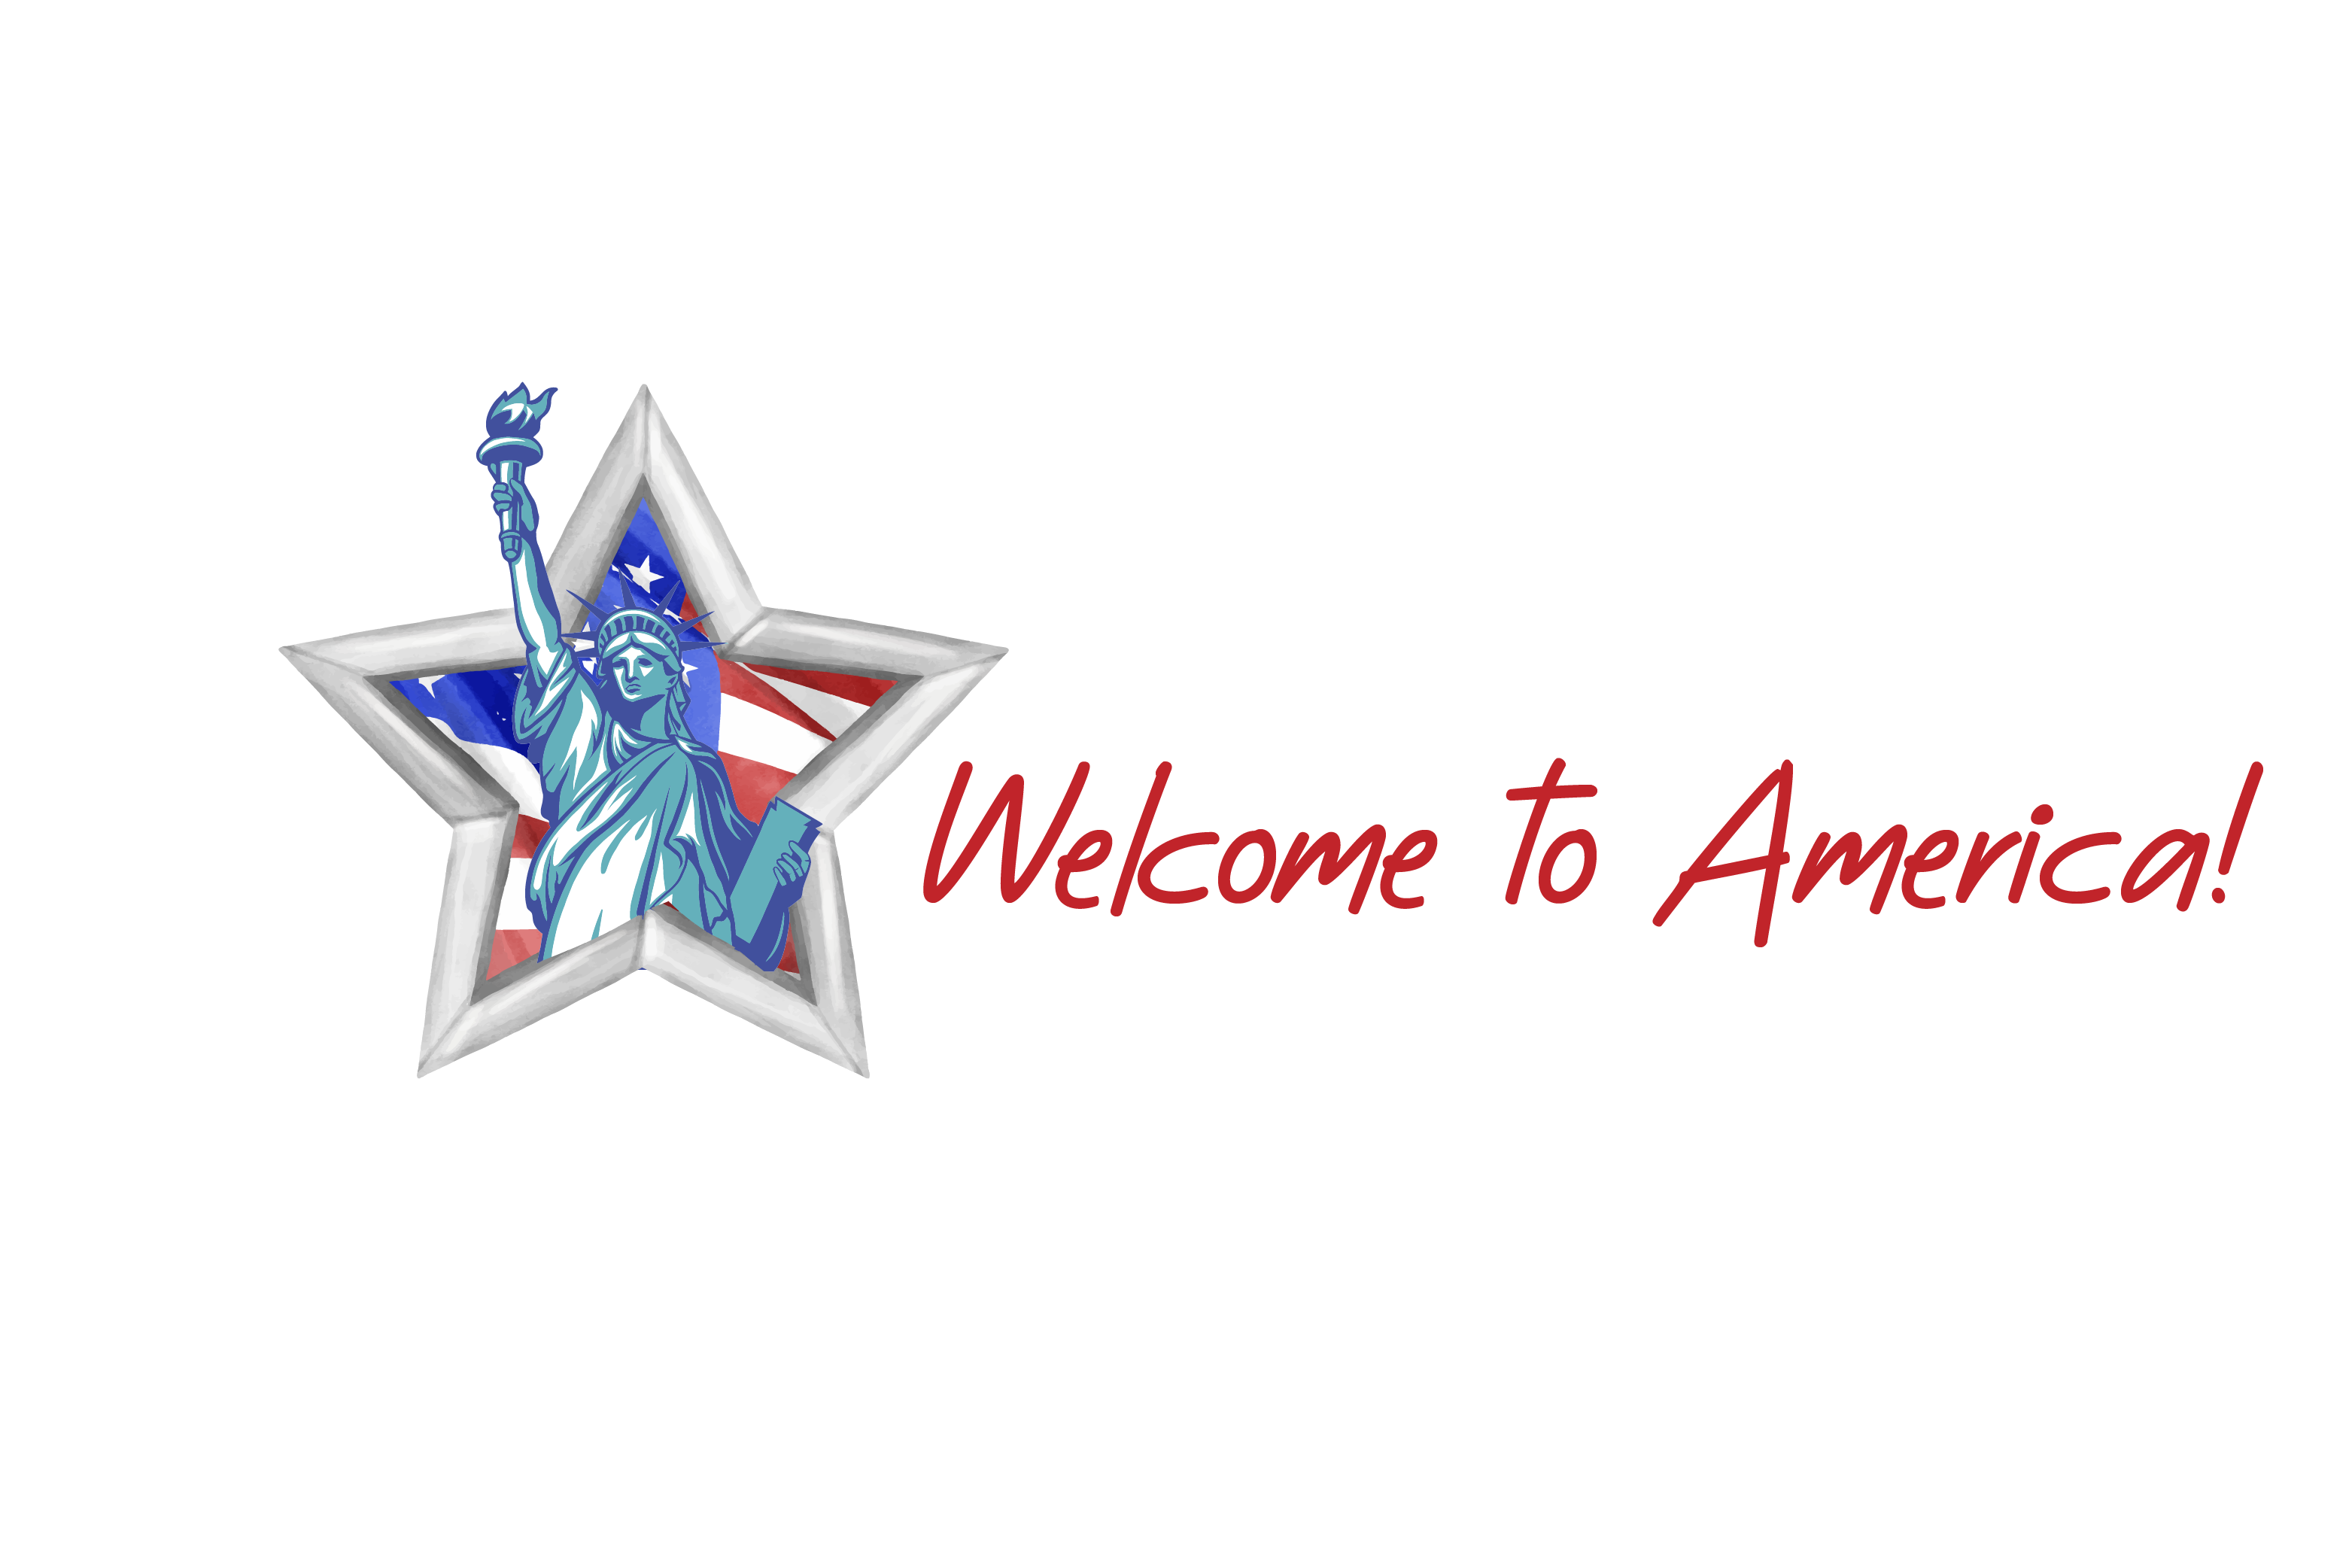 WELCOME TO AMERICA! logo